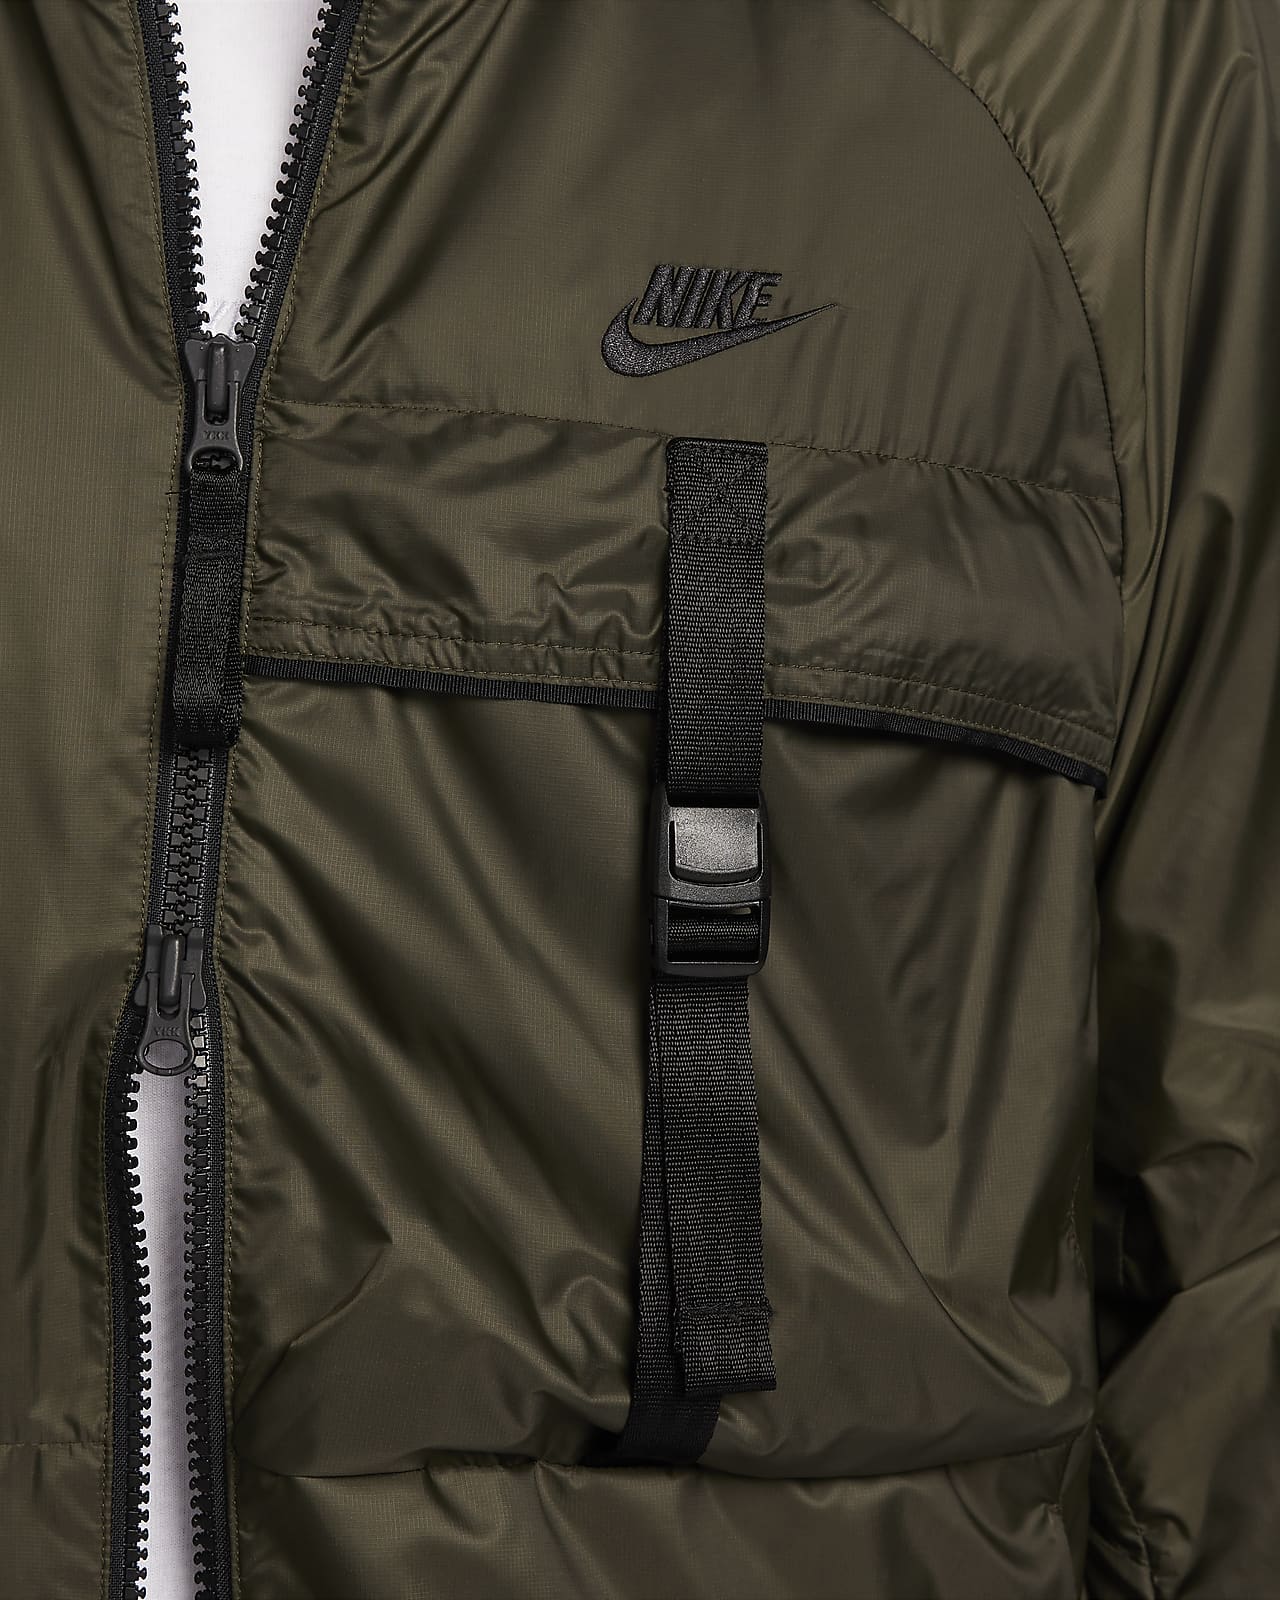 New Nike N24 PACKABLE lined Jacket ($190) and cargo pants ($150